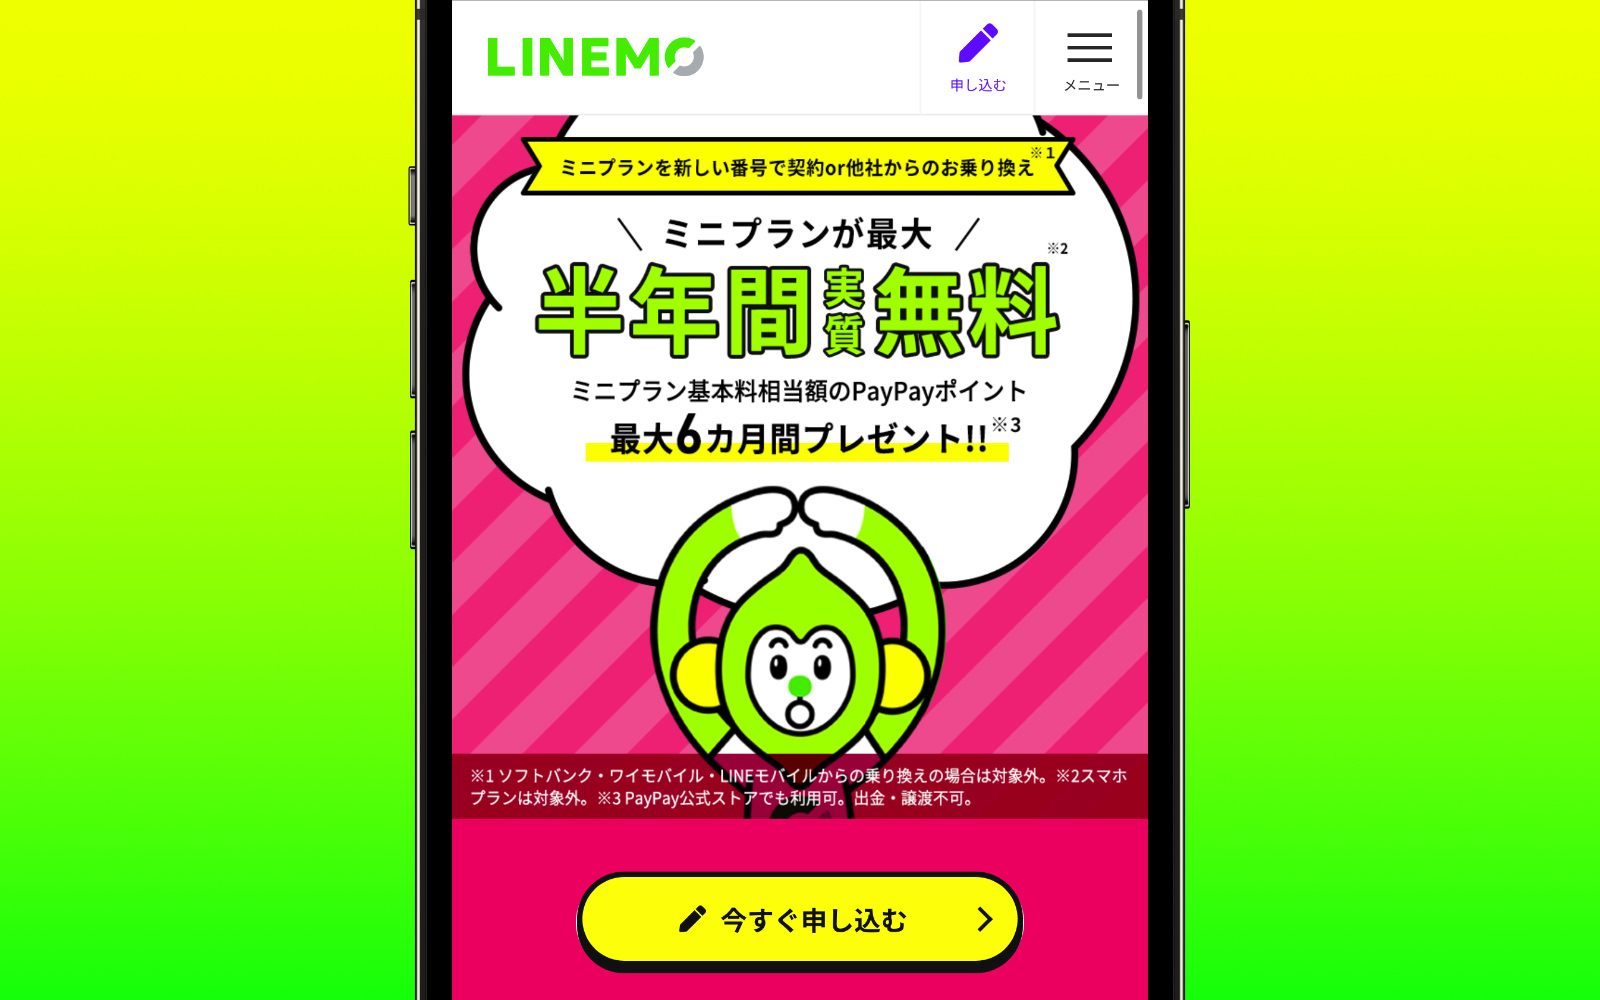 LINEMO Campaign 6month free